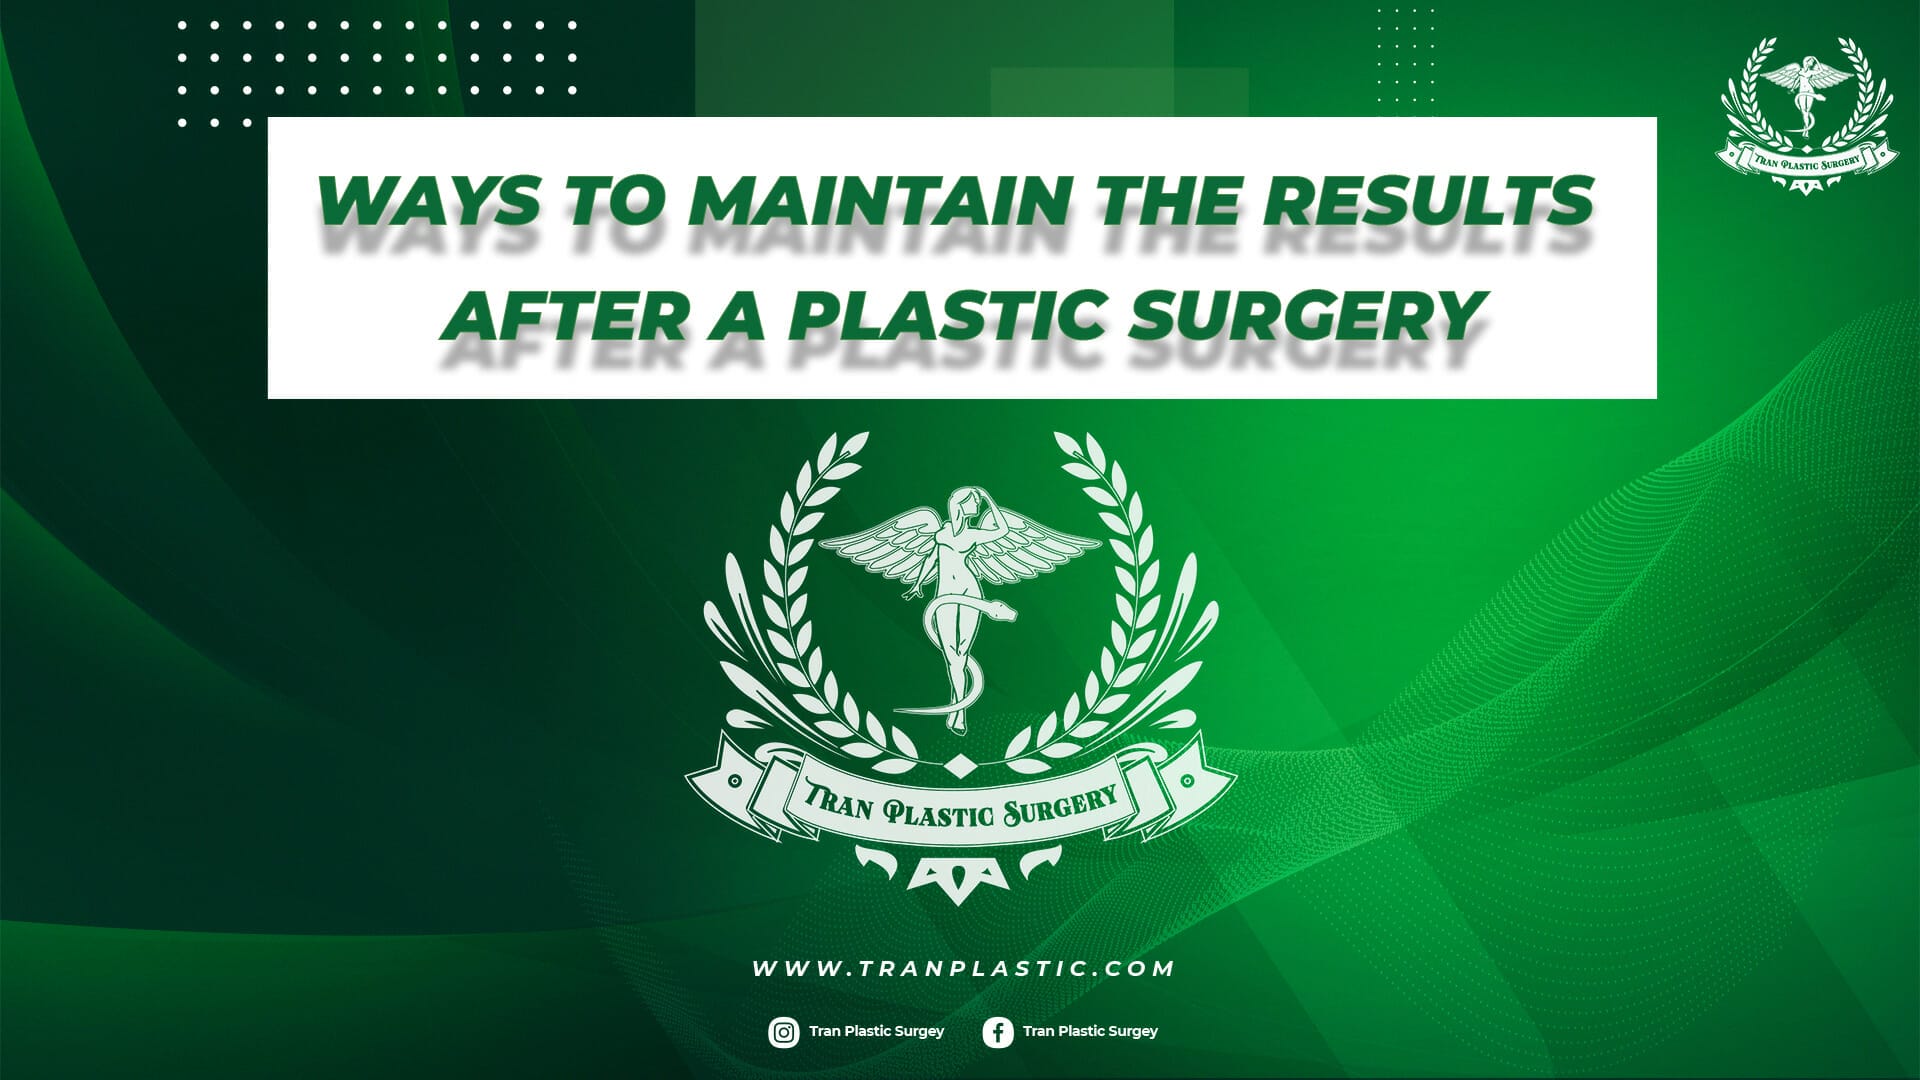 WAYS TO MAINTAIN THE RESULTS AFTER A PLASTIC SURGERY